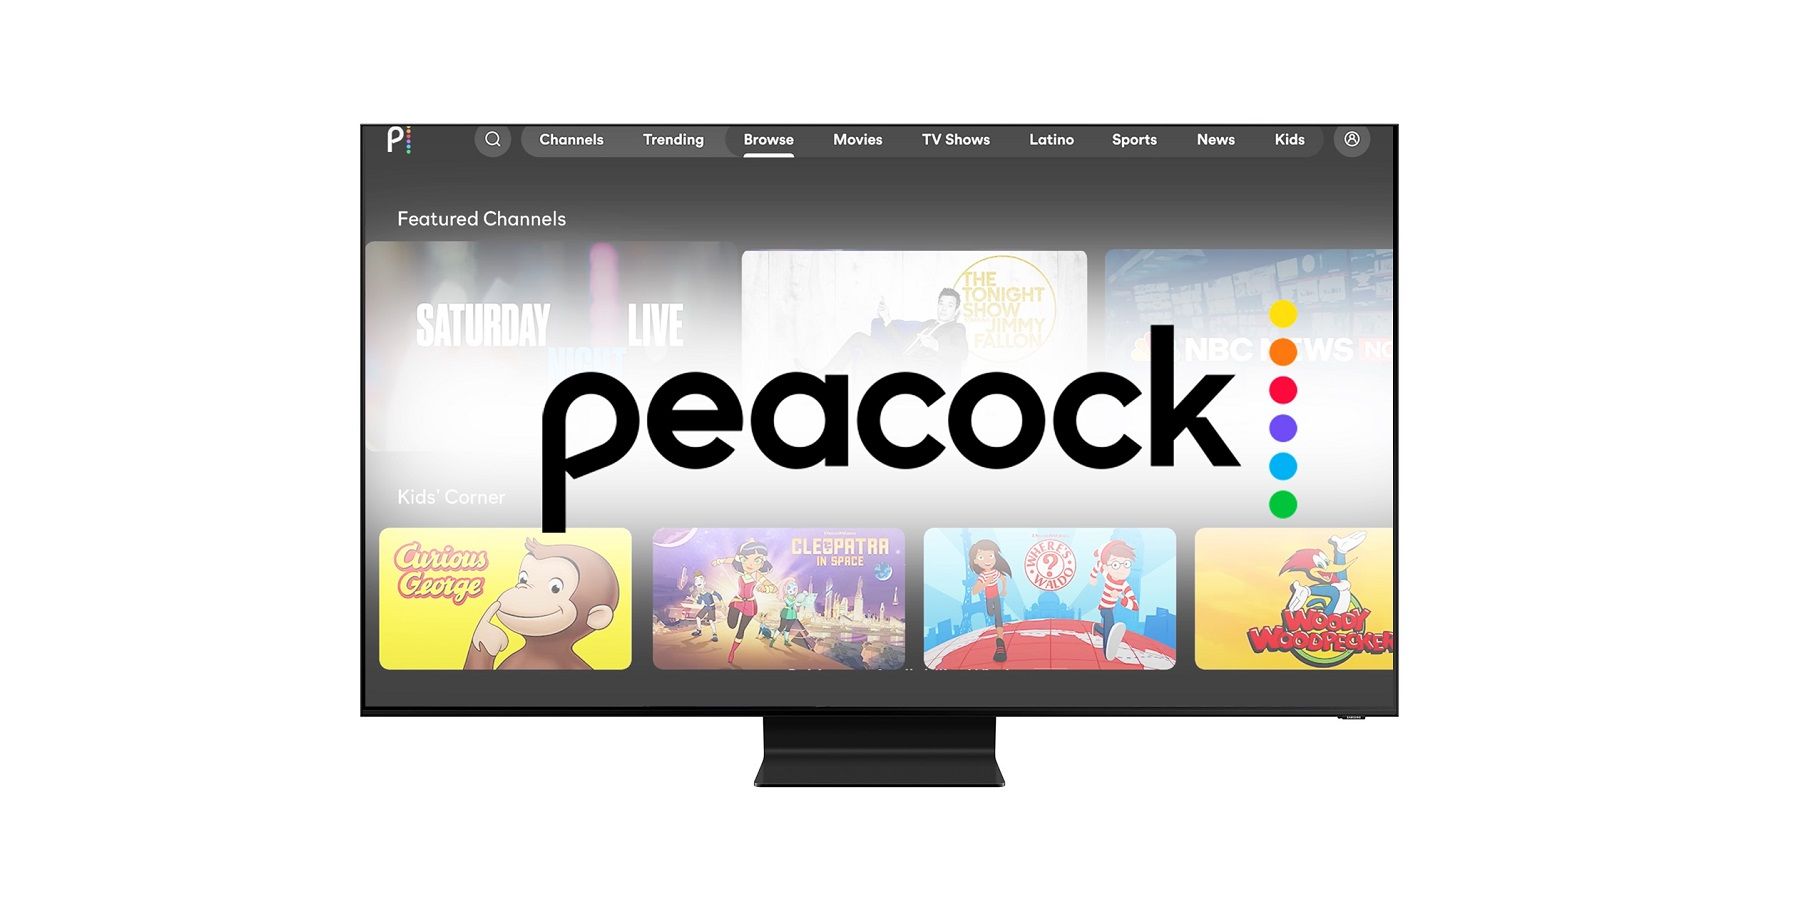 How to Watch Peacock on Samsung TV – Download & Install Peacock App